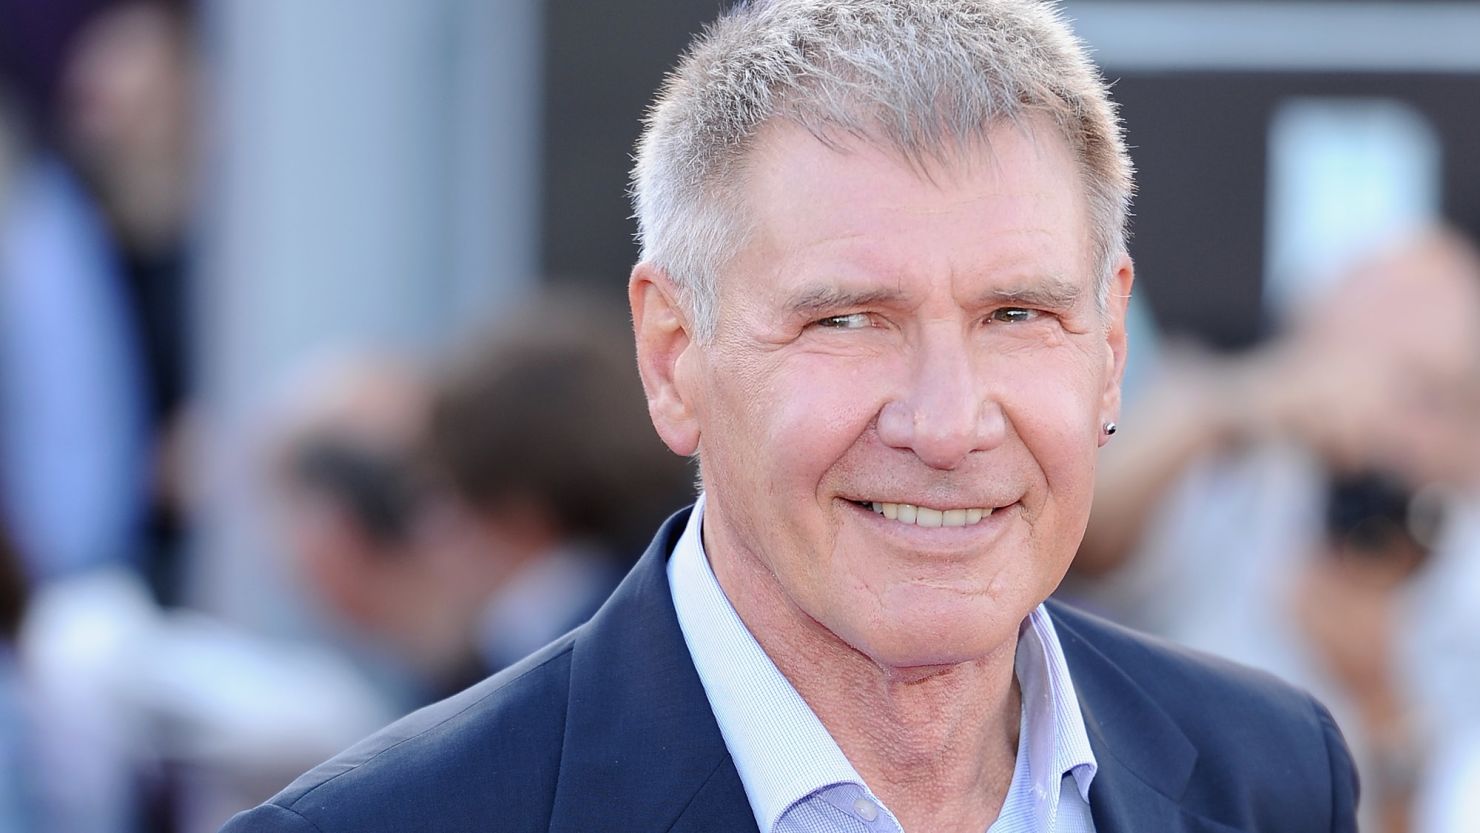 According to a "highly placed source," Harrison Ford is "open" to the idea of joining the new "Star Wars" movie.